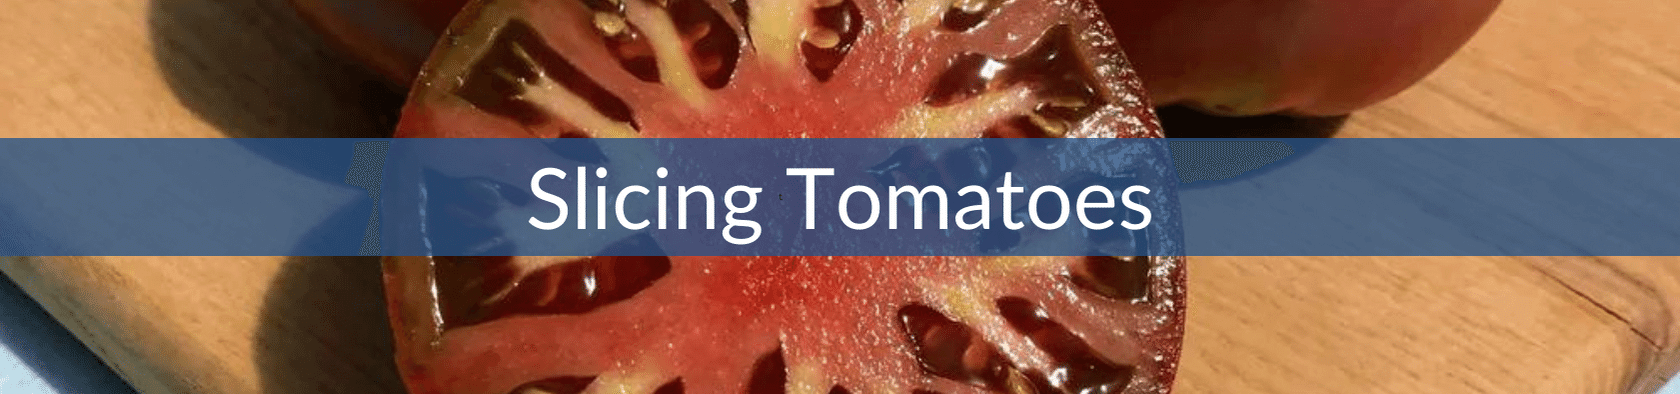 Slicing Tomatoes (1) (1).png__PID:6ab1cd20-8cb9-489b-a96d-8acd79bee21a